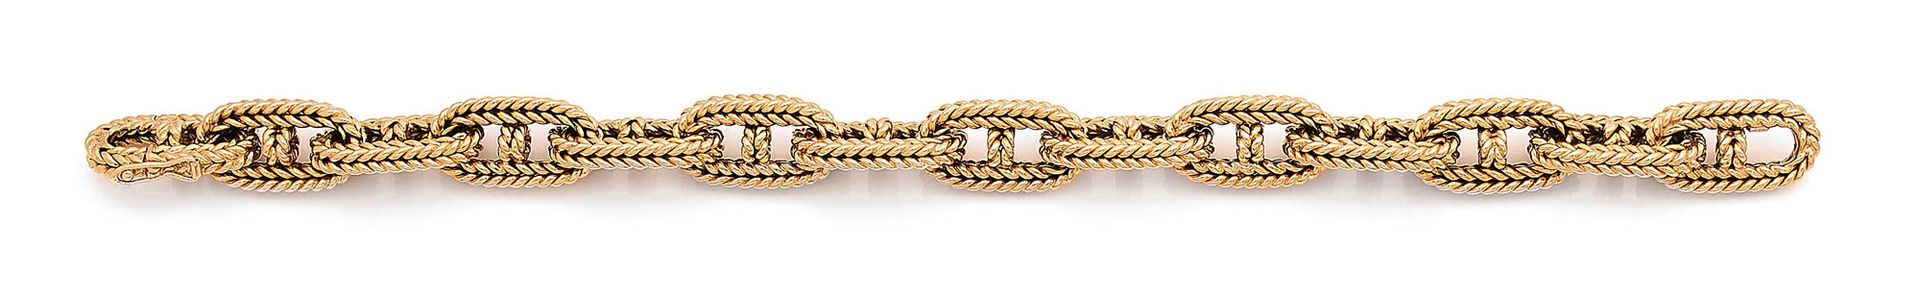 MARCHISIO Yellow gold bracelet (750) with twisted marine mesh.
Ratchet clasp wit&hellip;